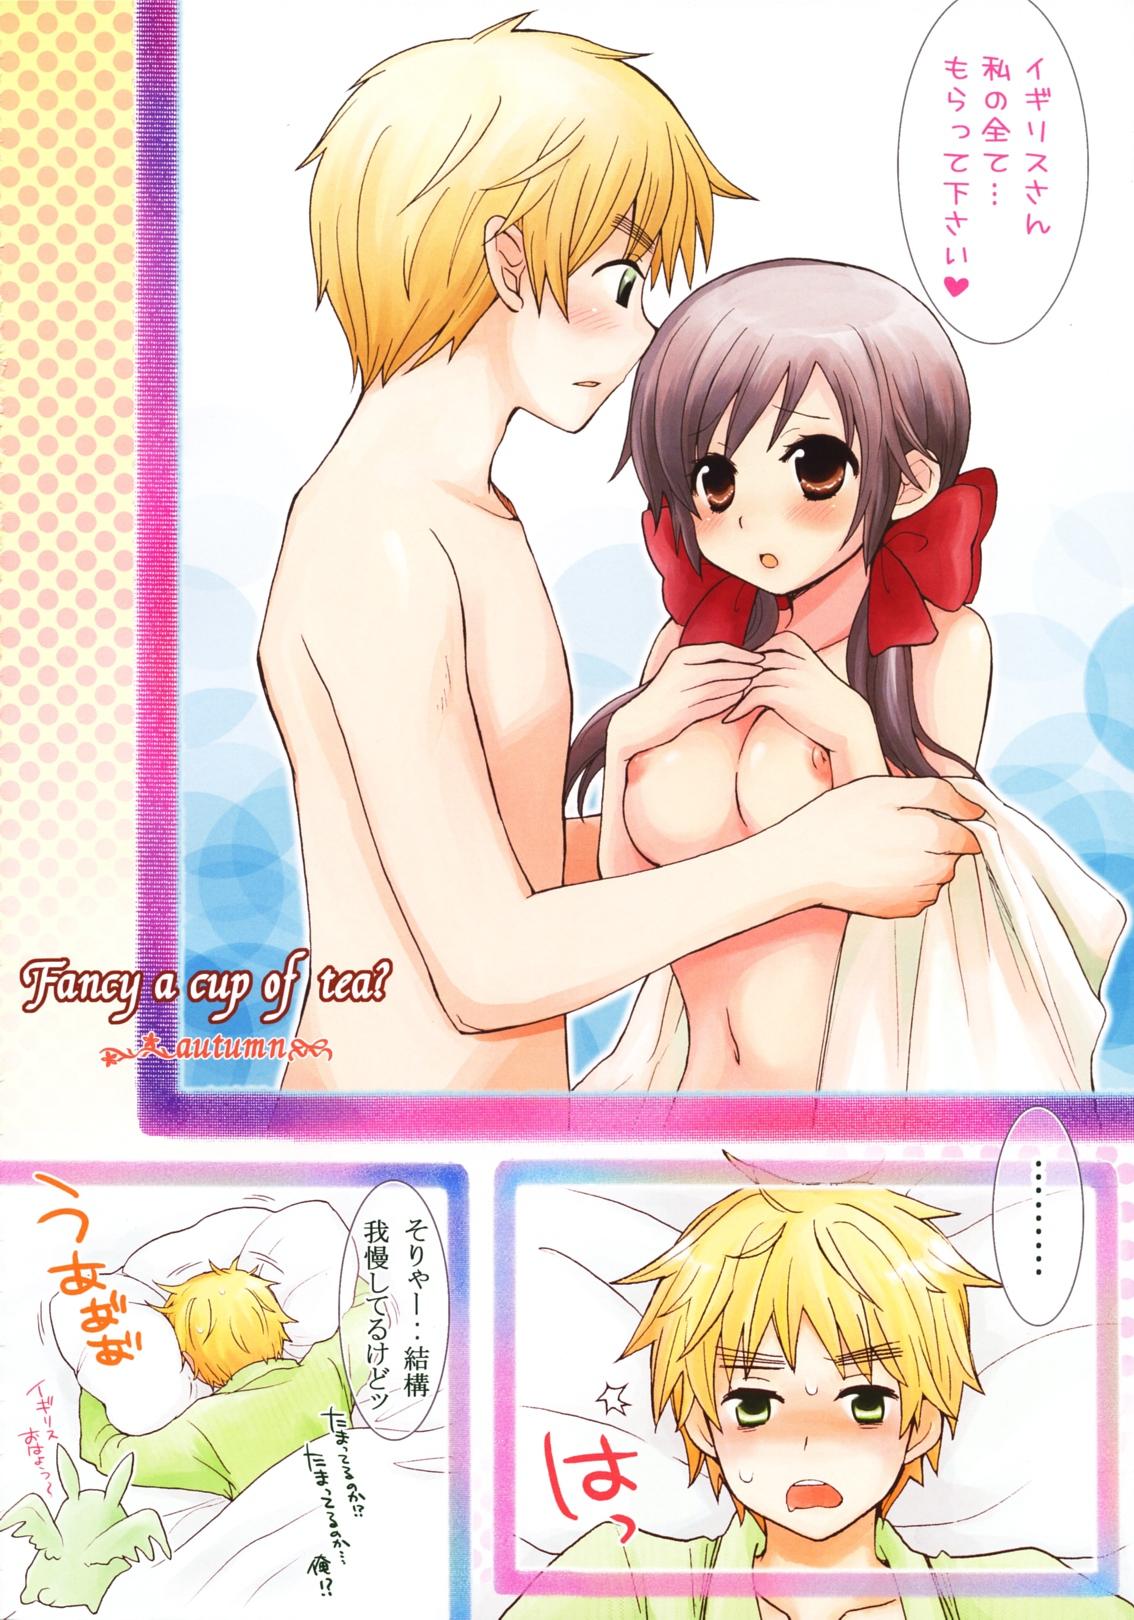 Oiled Fancy a cup of tea？ - Axis powers hetalia Dicksucking - Page 3